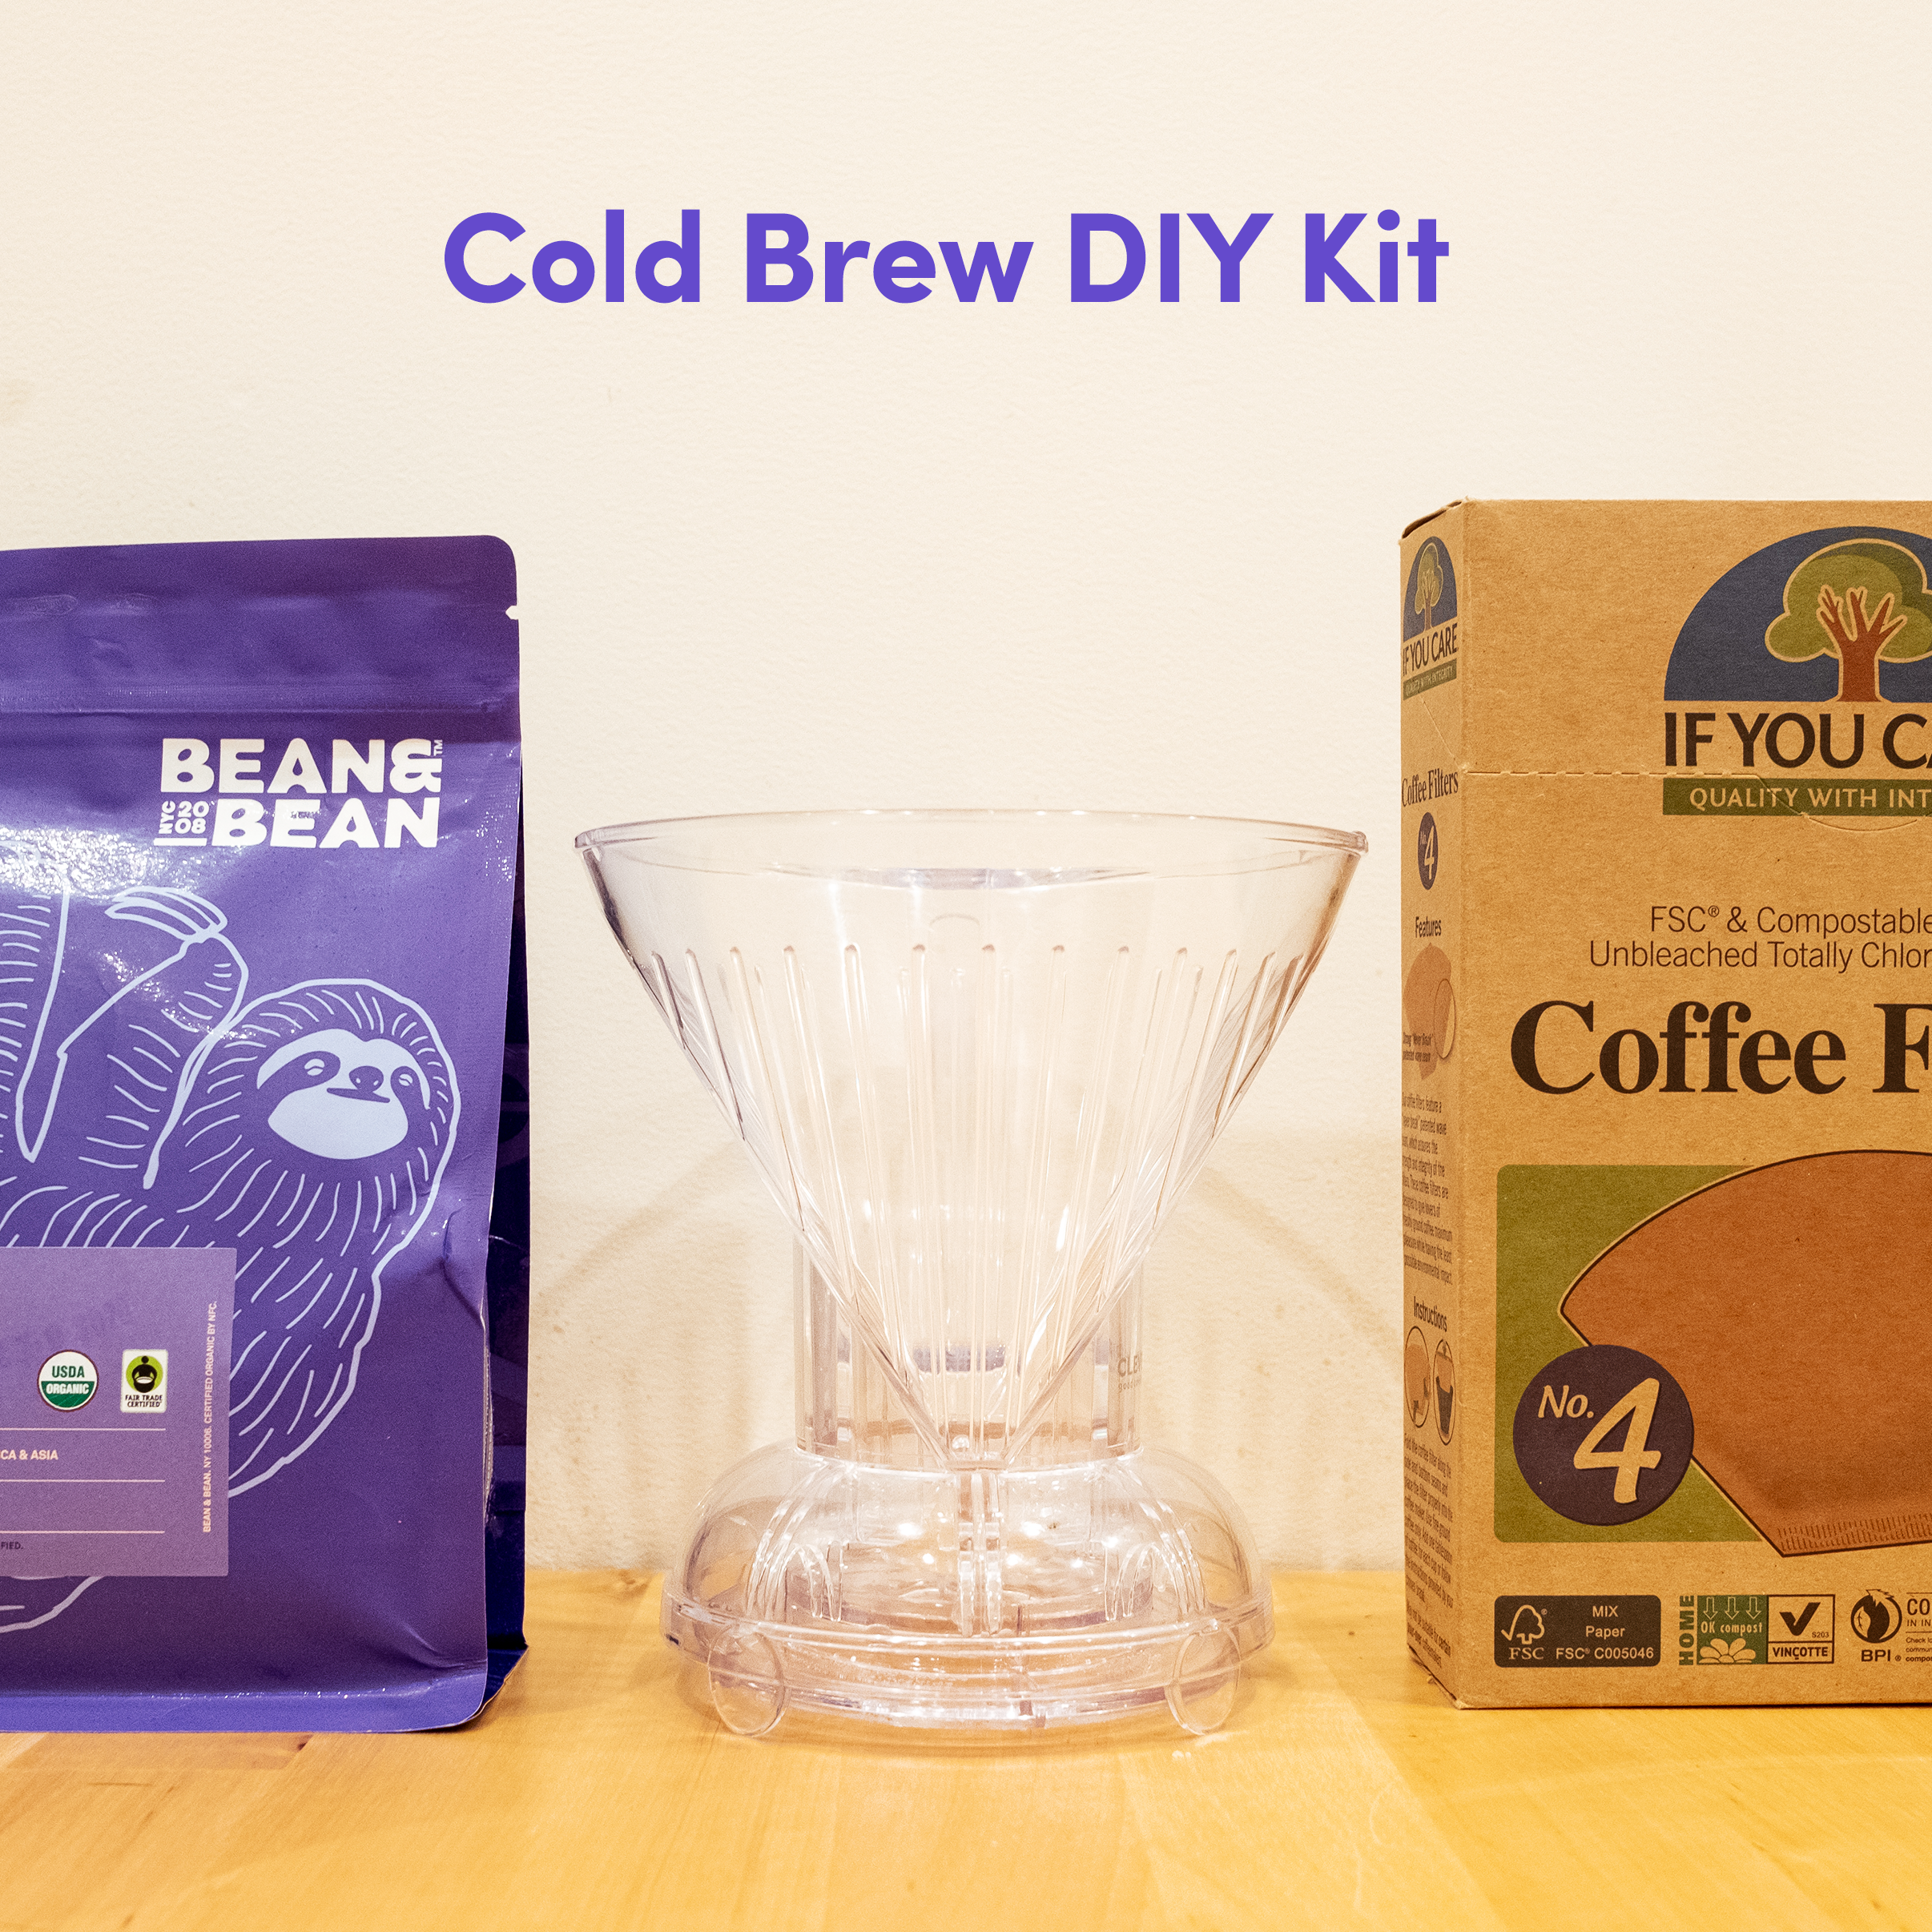 cold brew diy do it yourself coffee kit clever dripper if you care quality filter fsc compostable coffee filter no.4 filter